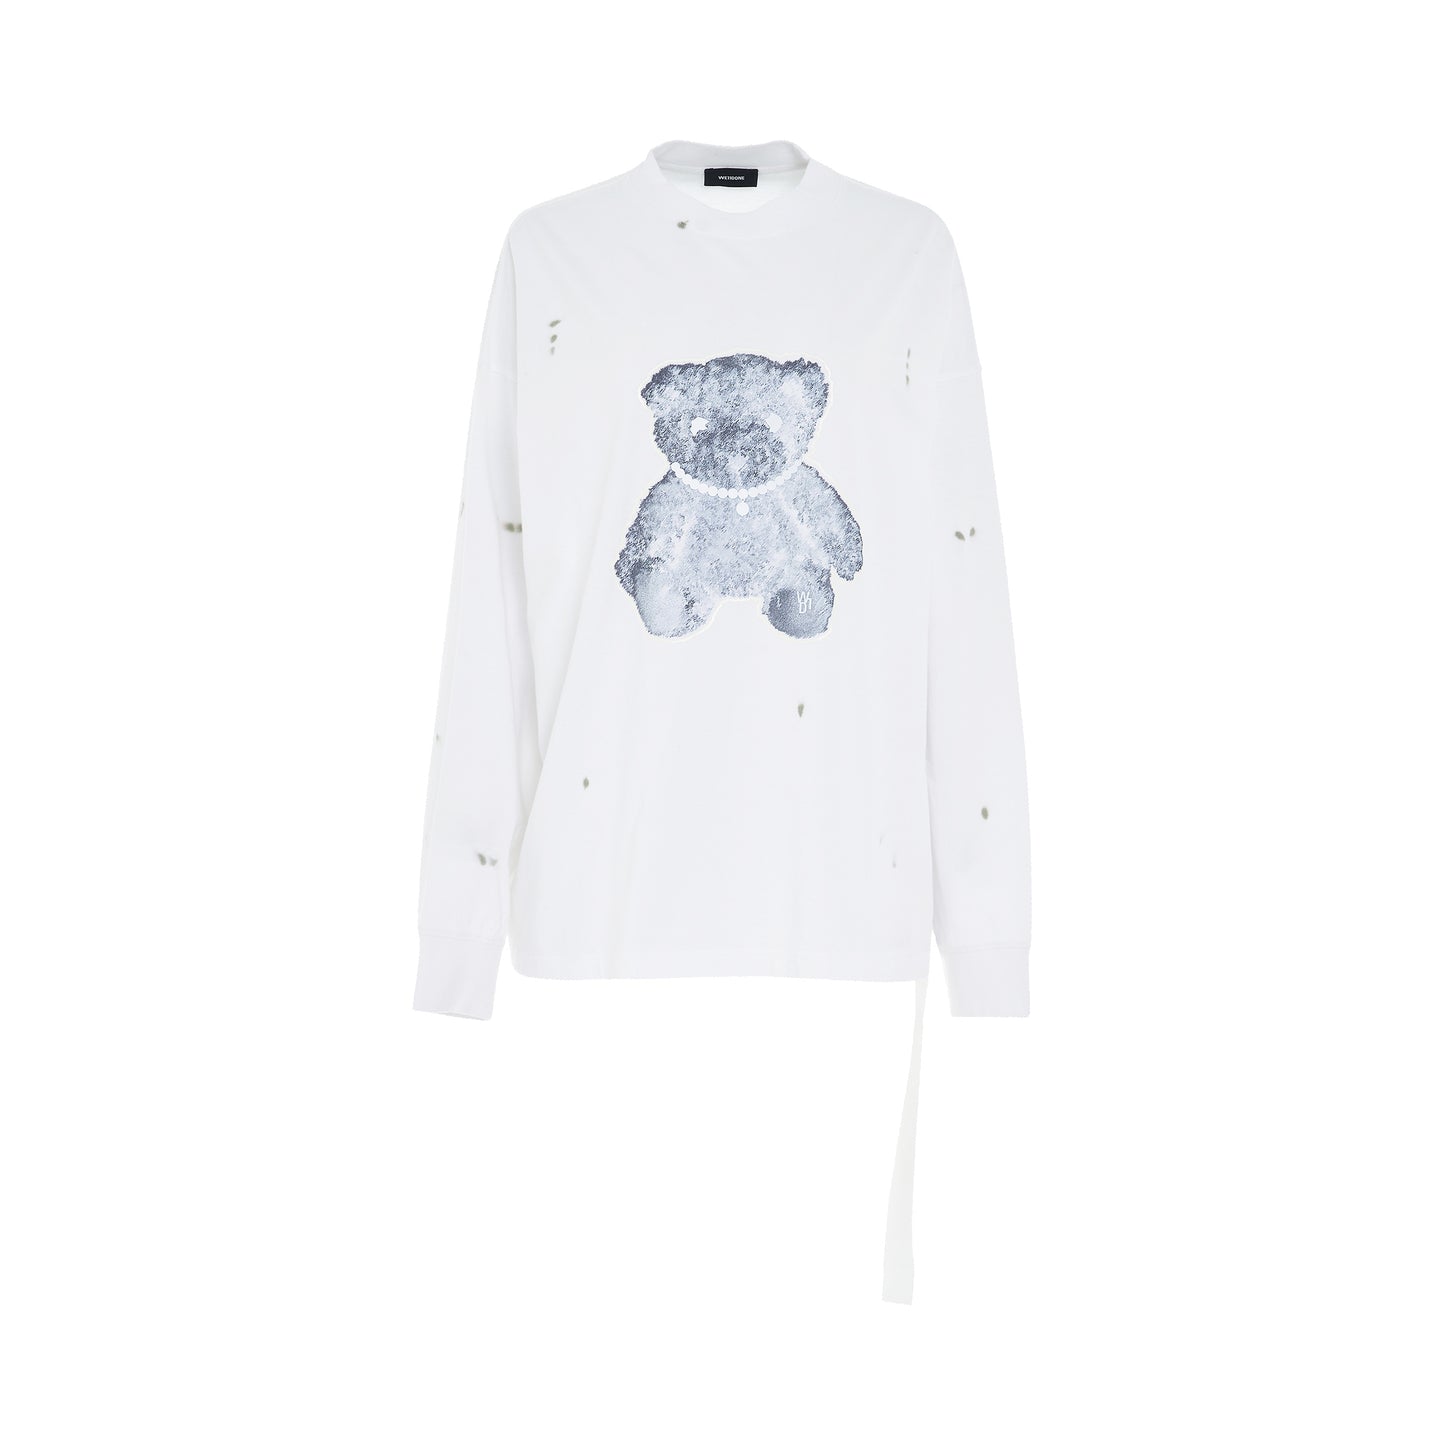 Pearl Necklace Teddy Long Sleeve T-Shirt in White